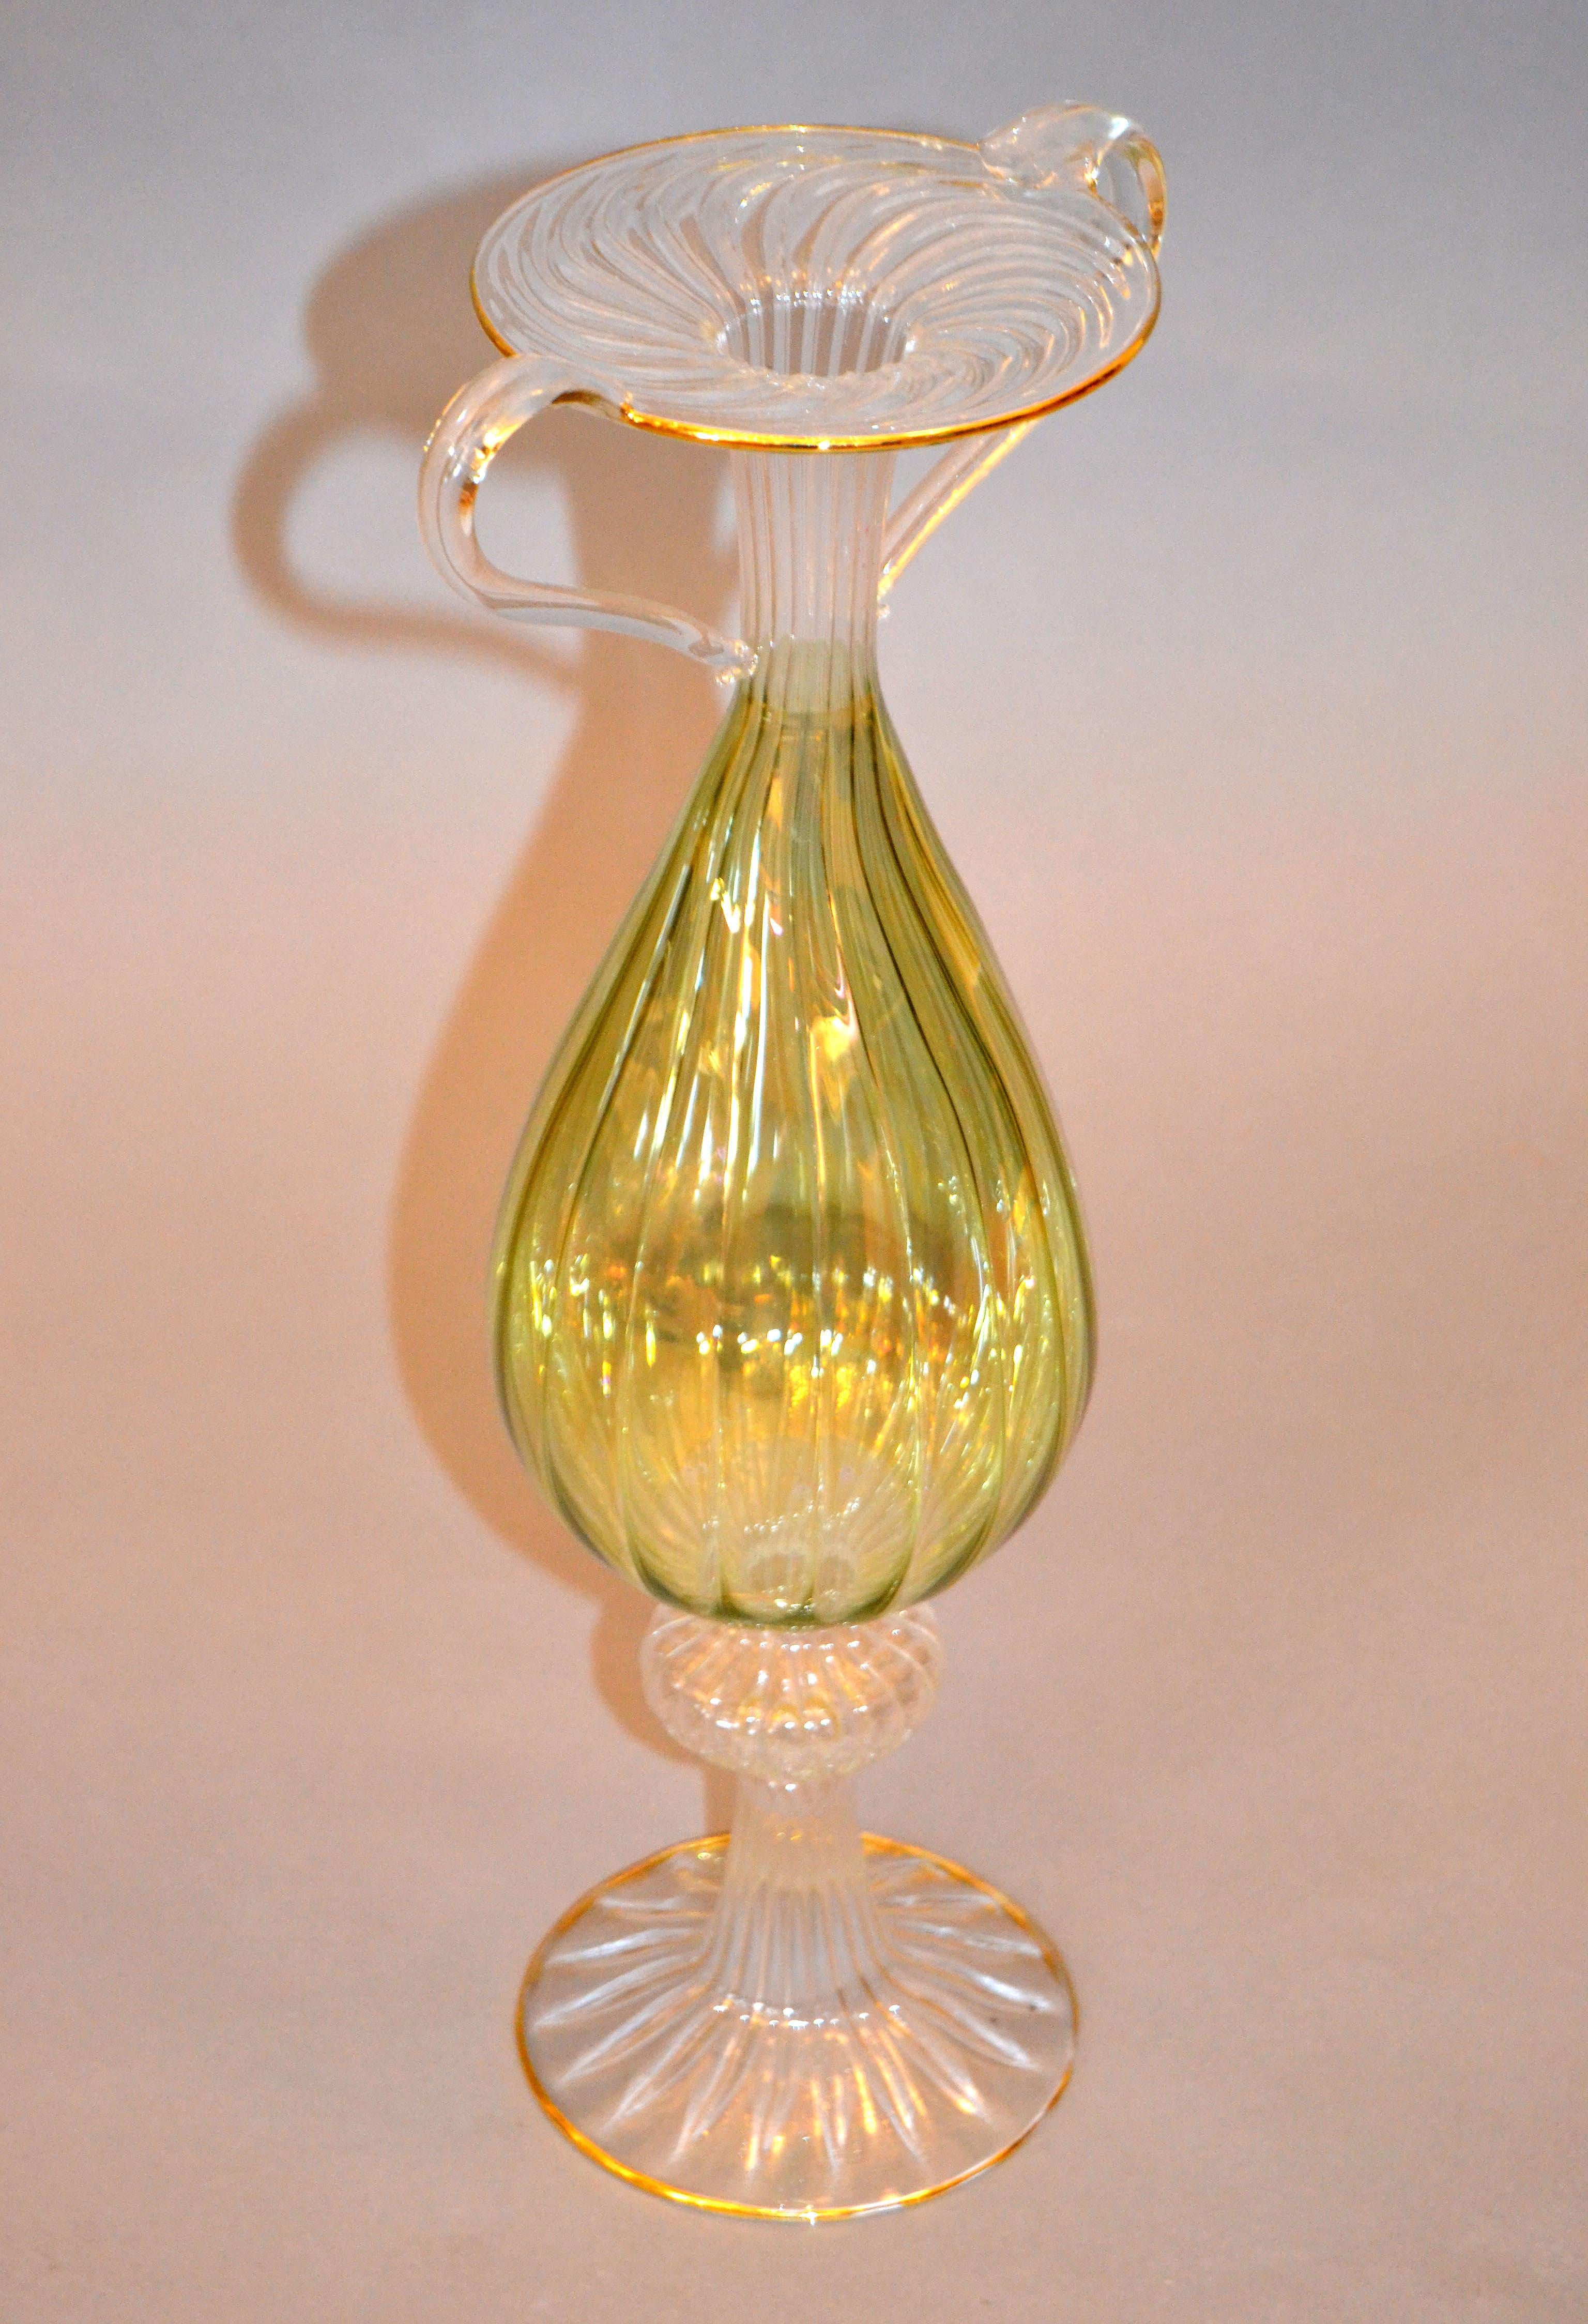 Mid-20th Century Venetian Murano Gold Green and Clear Hand-Blown Art Glass Tall Flower Vase For Sale